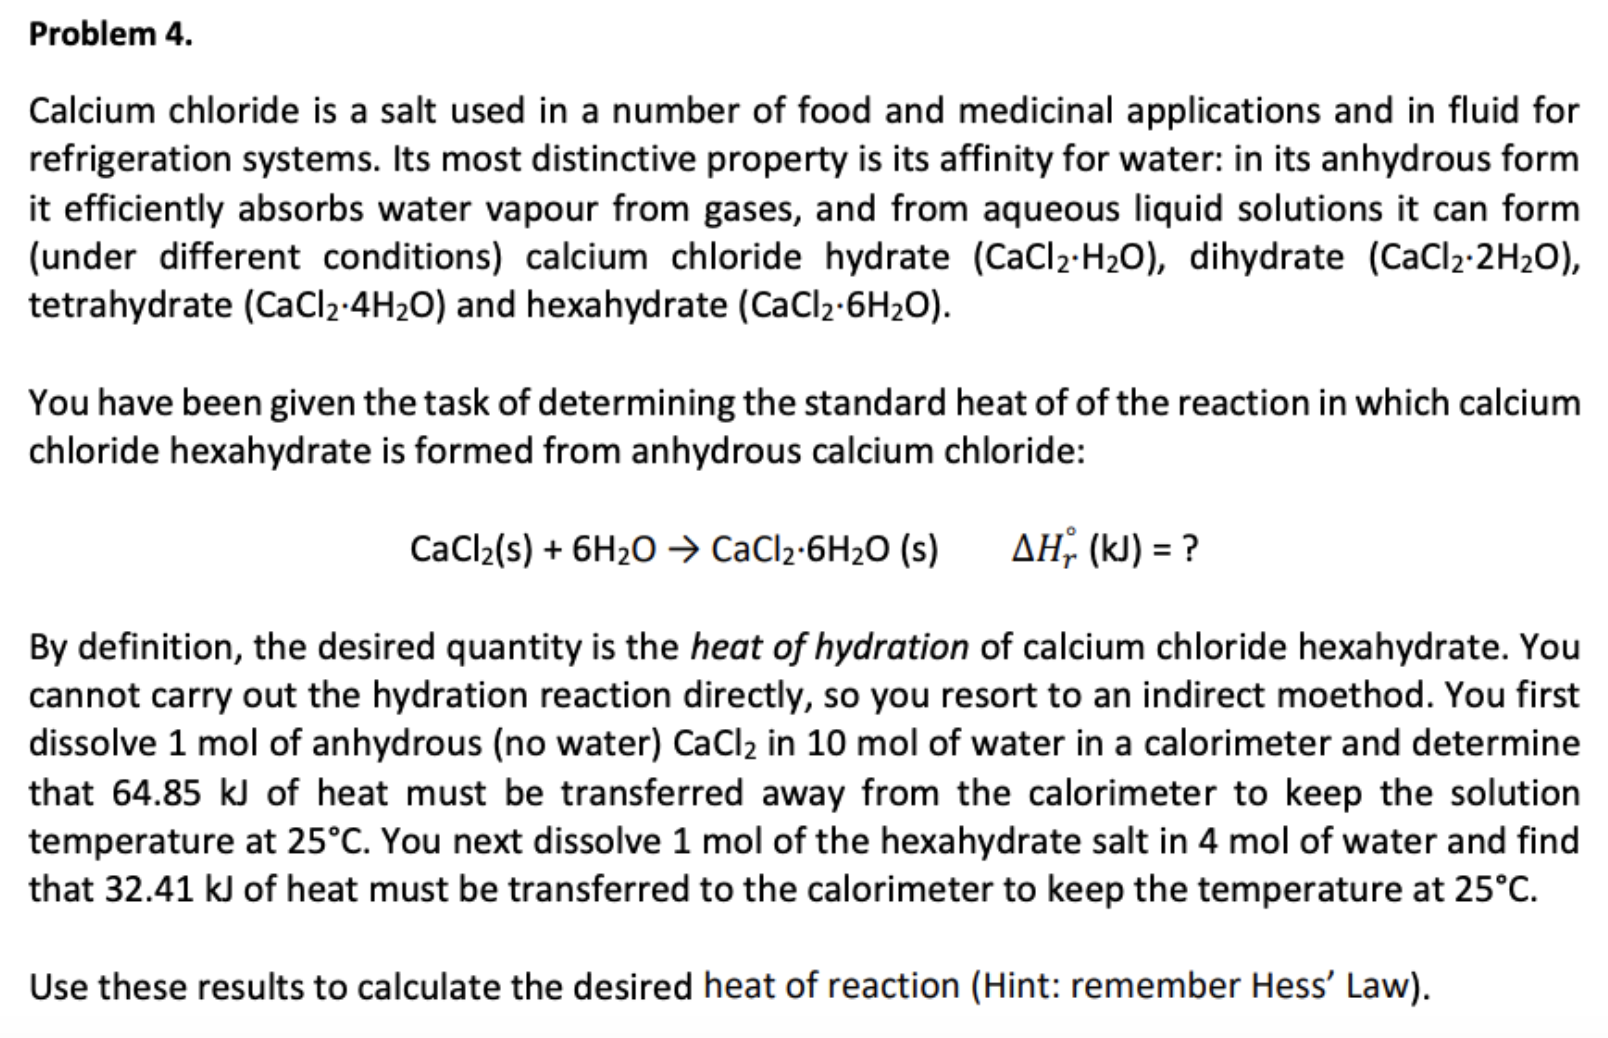 Problem 4.
Calcium chloride is a salt used in a number of food and medicinal applications and in fluid for
refrigeration systems. Its most distinctive property is its affinity for water: in its anhydrous form
it efficiently absorbs water vapour from gases, and from aqueous liquid solutions it can form
(under different conditions) calcium chloride hydrate (CaCl2-H20), dihydrate (CaCl2 2H2O),
tetrahydrate (CaCl2-4H2O) and hexahydrate (CaCl2-6H2O).
You have been given the task of determining the standard heat of of the reaction in which calcium
chloride hexahydrate is formed from anhydrous calcium chloride:
AH (k) ?
CaCl2(s)6H20 CaCl2-6H20 (s)
By definition, the desired quantity is the heat of hydration of calcium chloride hexahydrate. You
cannot carry out the hydration reaction directly, so you resort to an indirect moethod. You first
dissolve 1 mol of anhydrous (no water) CaCl2 in 10 mol of water in a calorimeter and determine
that 64.85 kJ of heat must be transferred away from the calorimeter to keep the solution
temperature at 25°C. You next dissolve 1 mol of the hexahydrate salt in 4 mol of water and find
that 32.41 kJ of heat must be transferred to the calorimeter to keep the temperature at 25°C
Use these results to calculate the desired heat of reaction (Hint: remember Hess' Law)
